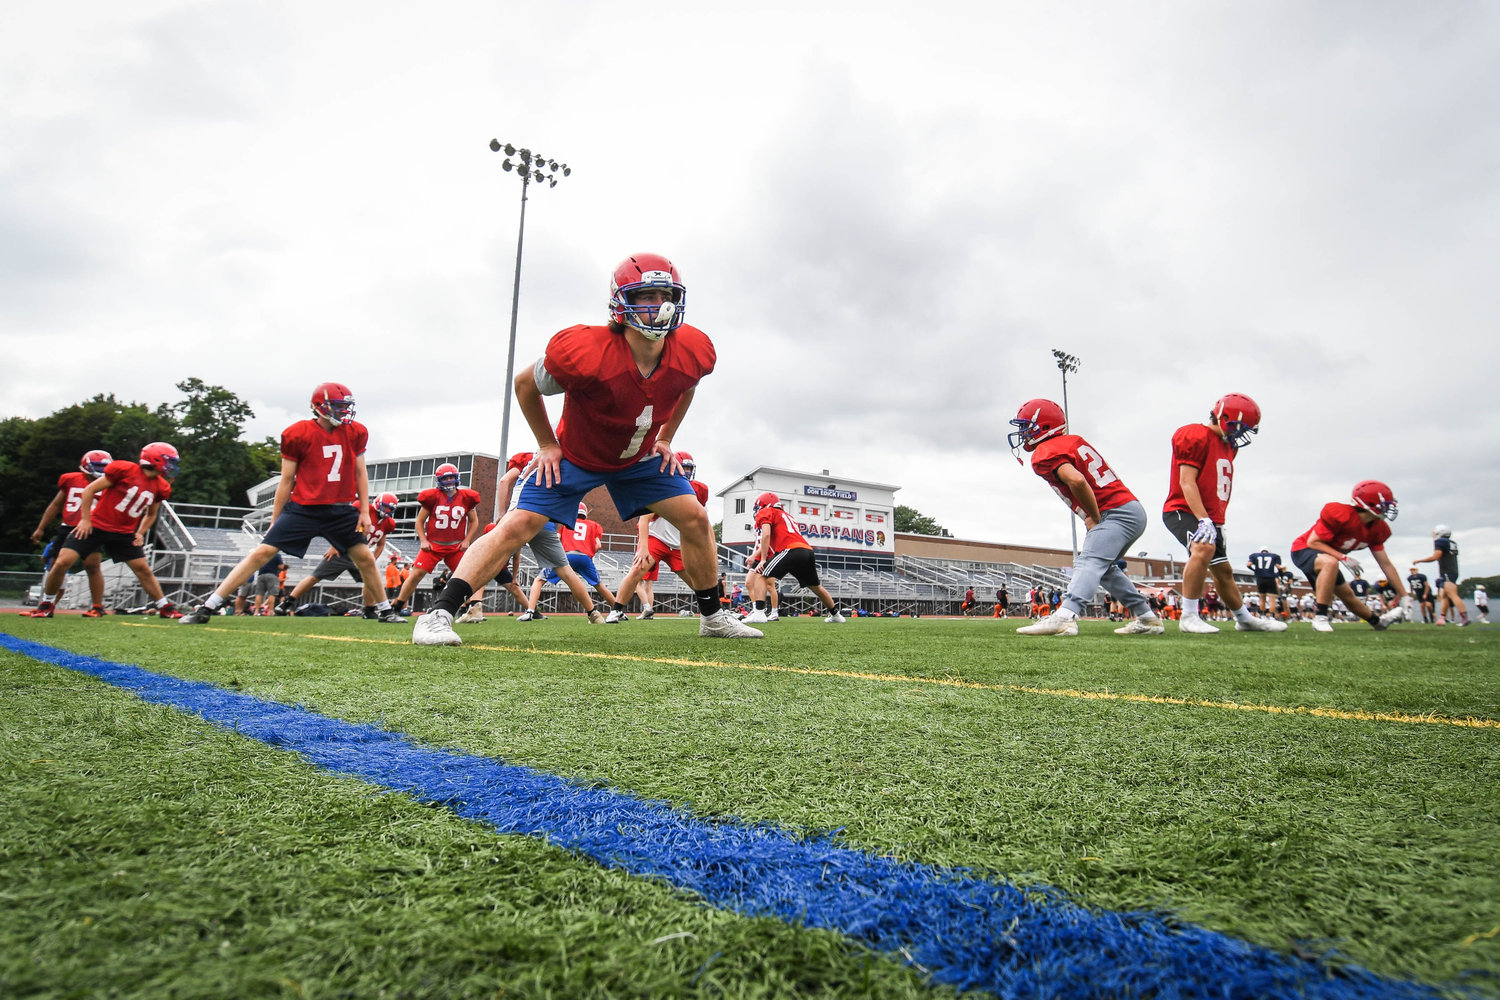 GETTING LOOSE — New Hartford football players warm up and stretch at the start of a seven-on-seven camp on Tuesday at Don Edick Field in New Hartford. The Spartans open the 2022 season on the road against Rome Free Academy at 6:30 p.m. on Friday, Sept. 2, at RFA Stadium.